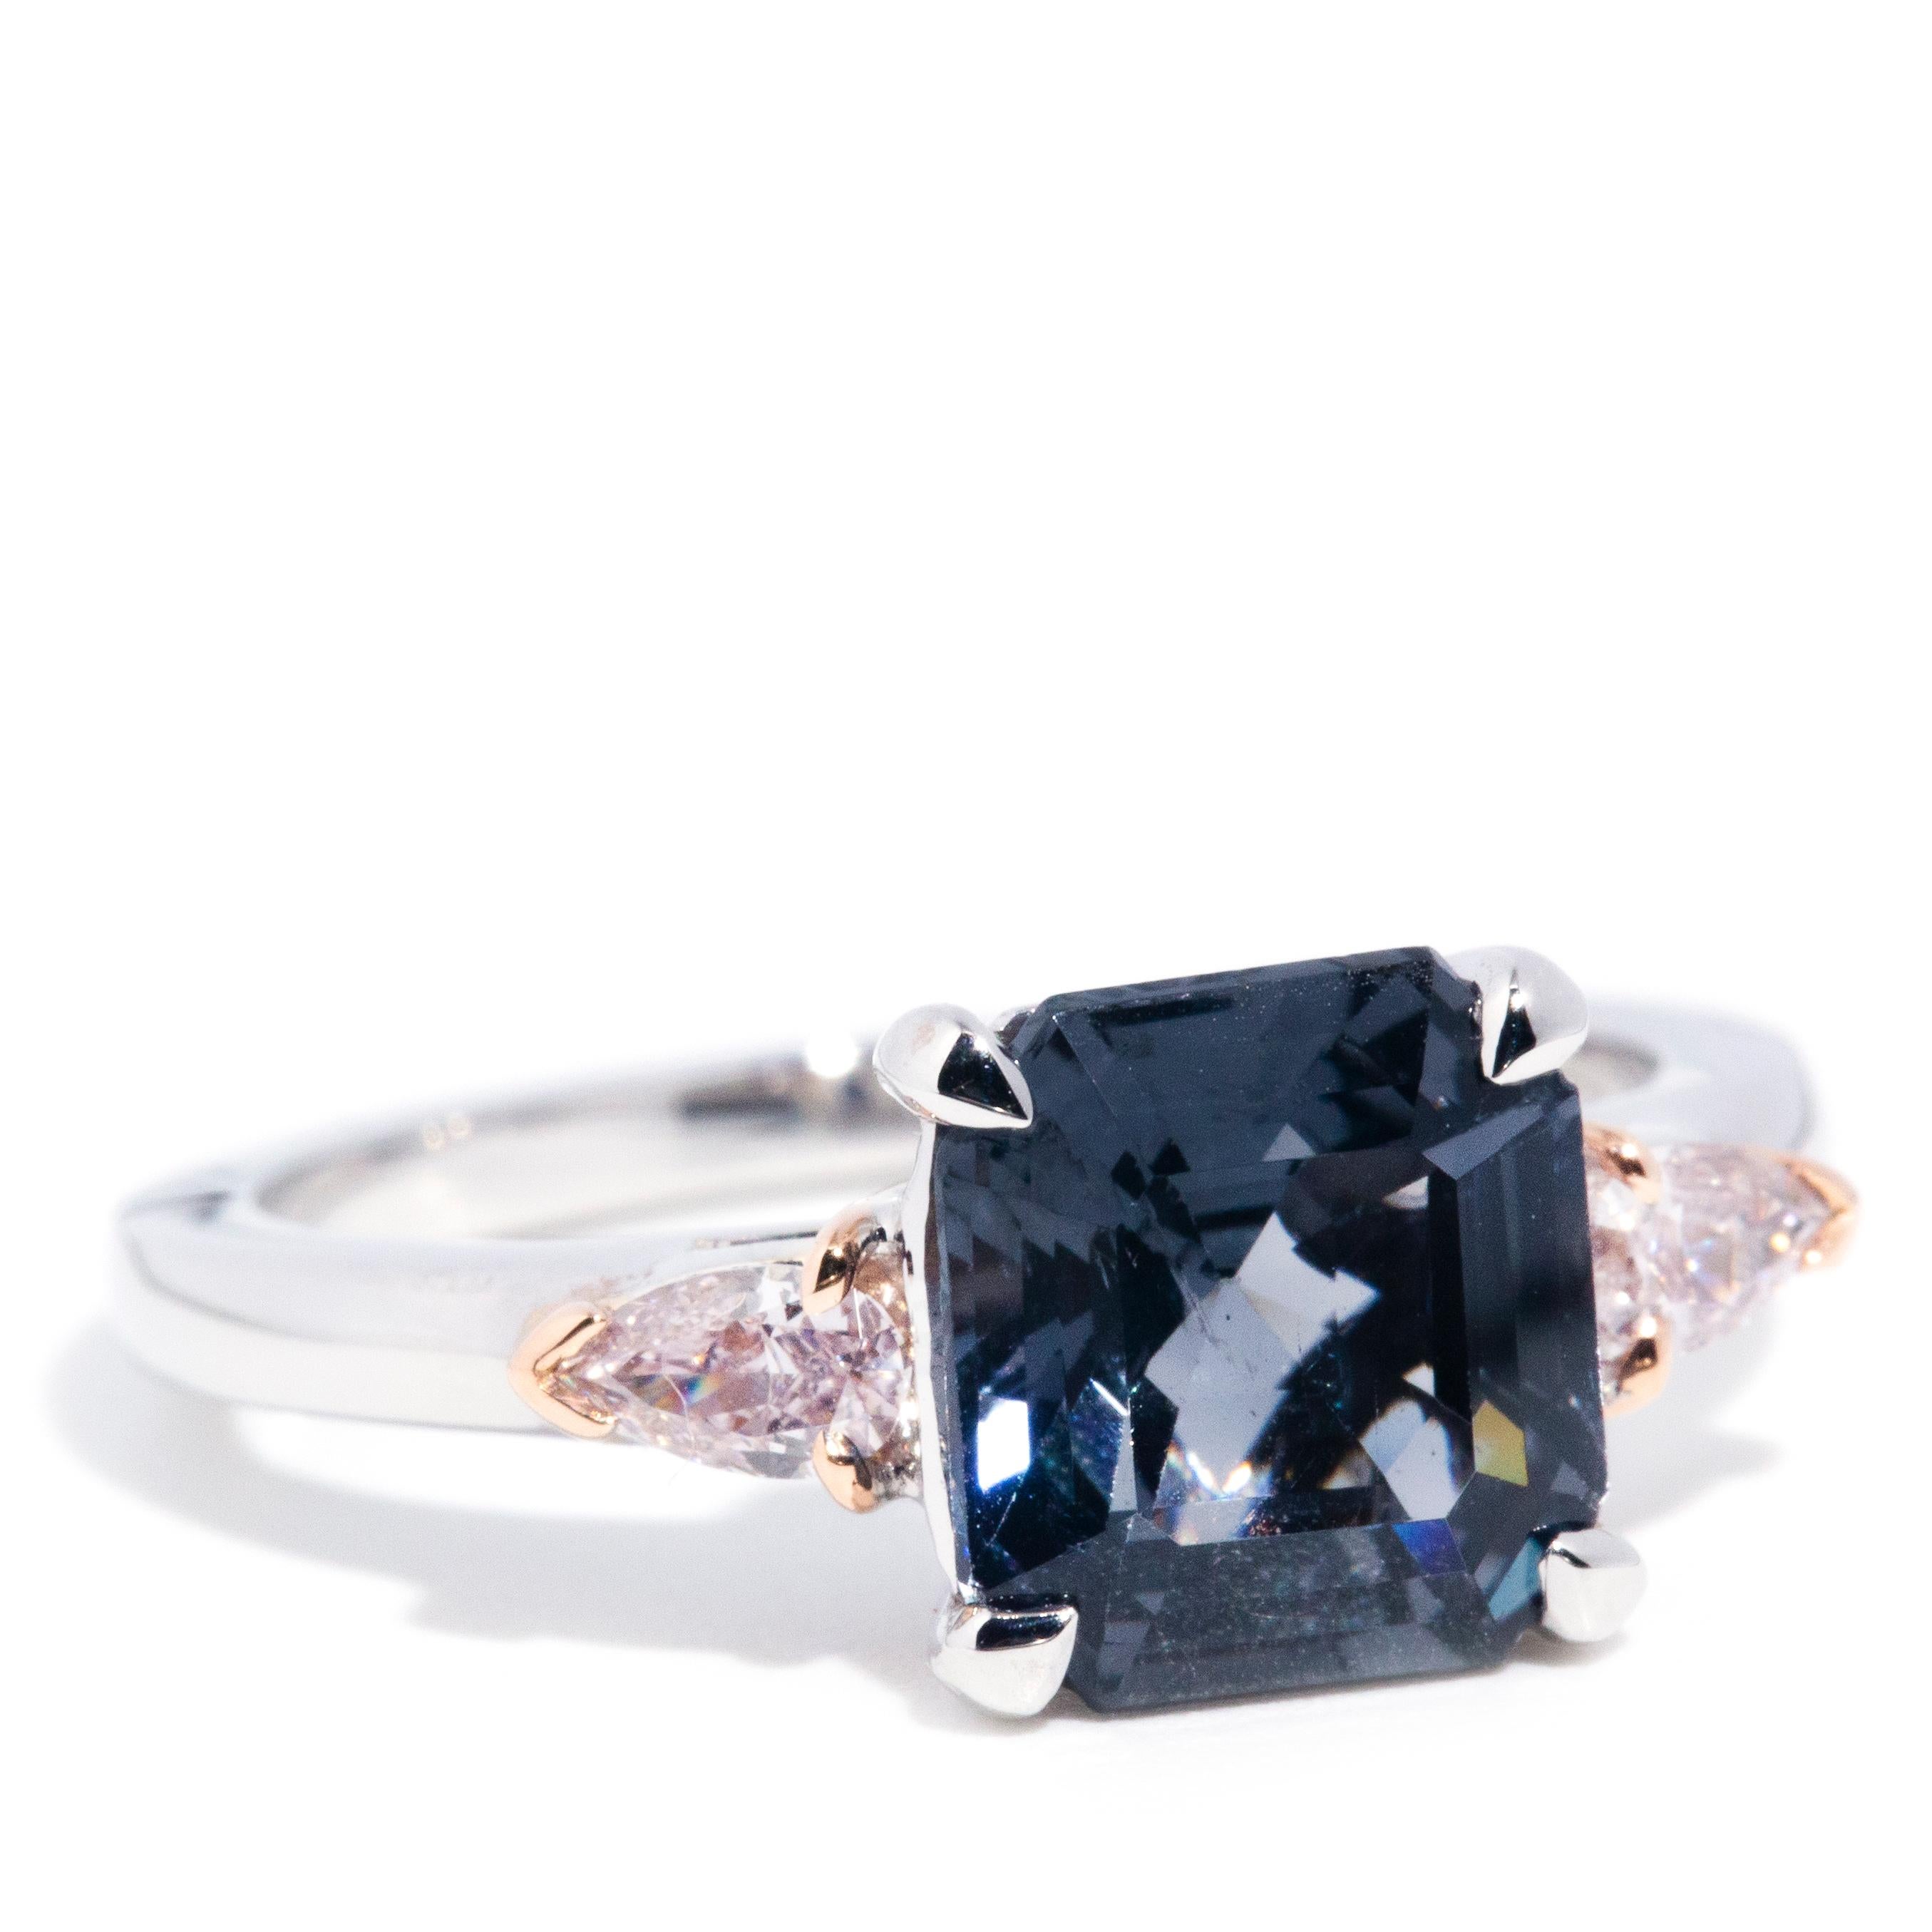 Lovingly crafted in 18 carat gold, this captivating contemporary ring features a gorgeous 3.01 carat greyish-blue purple square cut spinel flanked by an enchanting pair of shimmering pear cut pink diamonds. This fabulous ring is named The Arlo Ring,